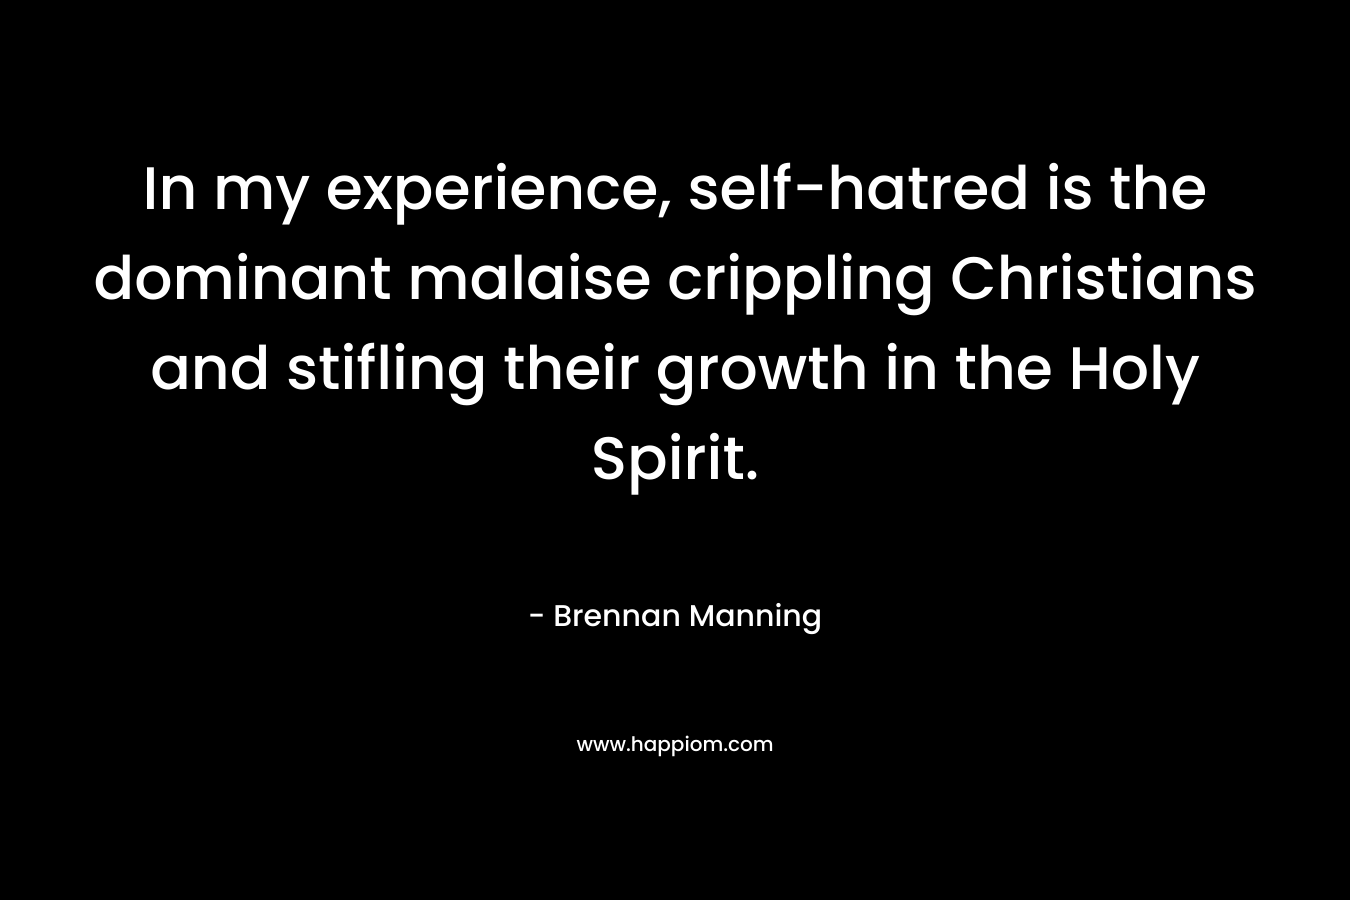 In my experience, self-hatred is the dominant malaise crippling Christians and stifling their growth in the Holy Spirit. – Brennan Manning